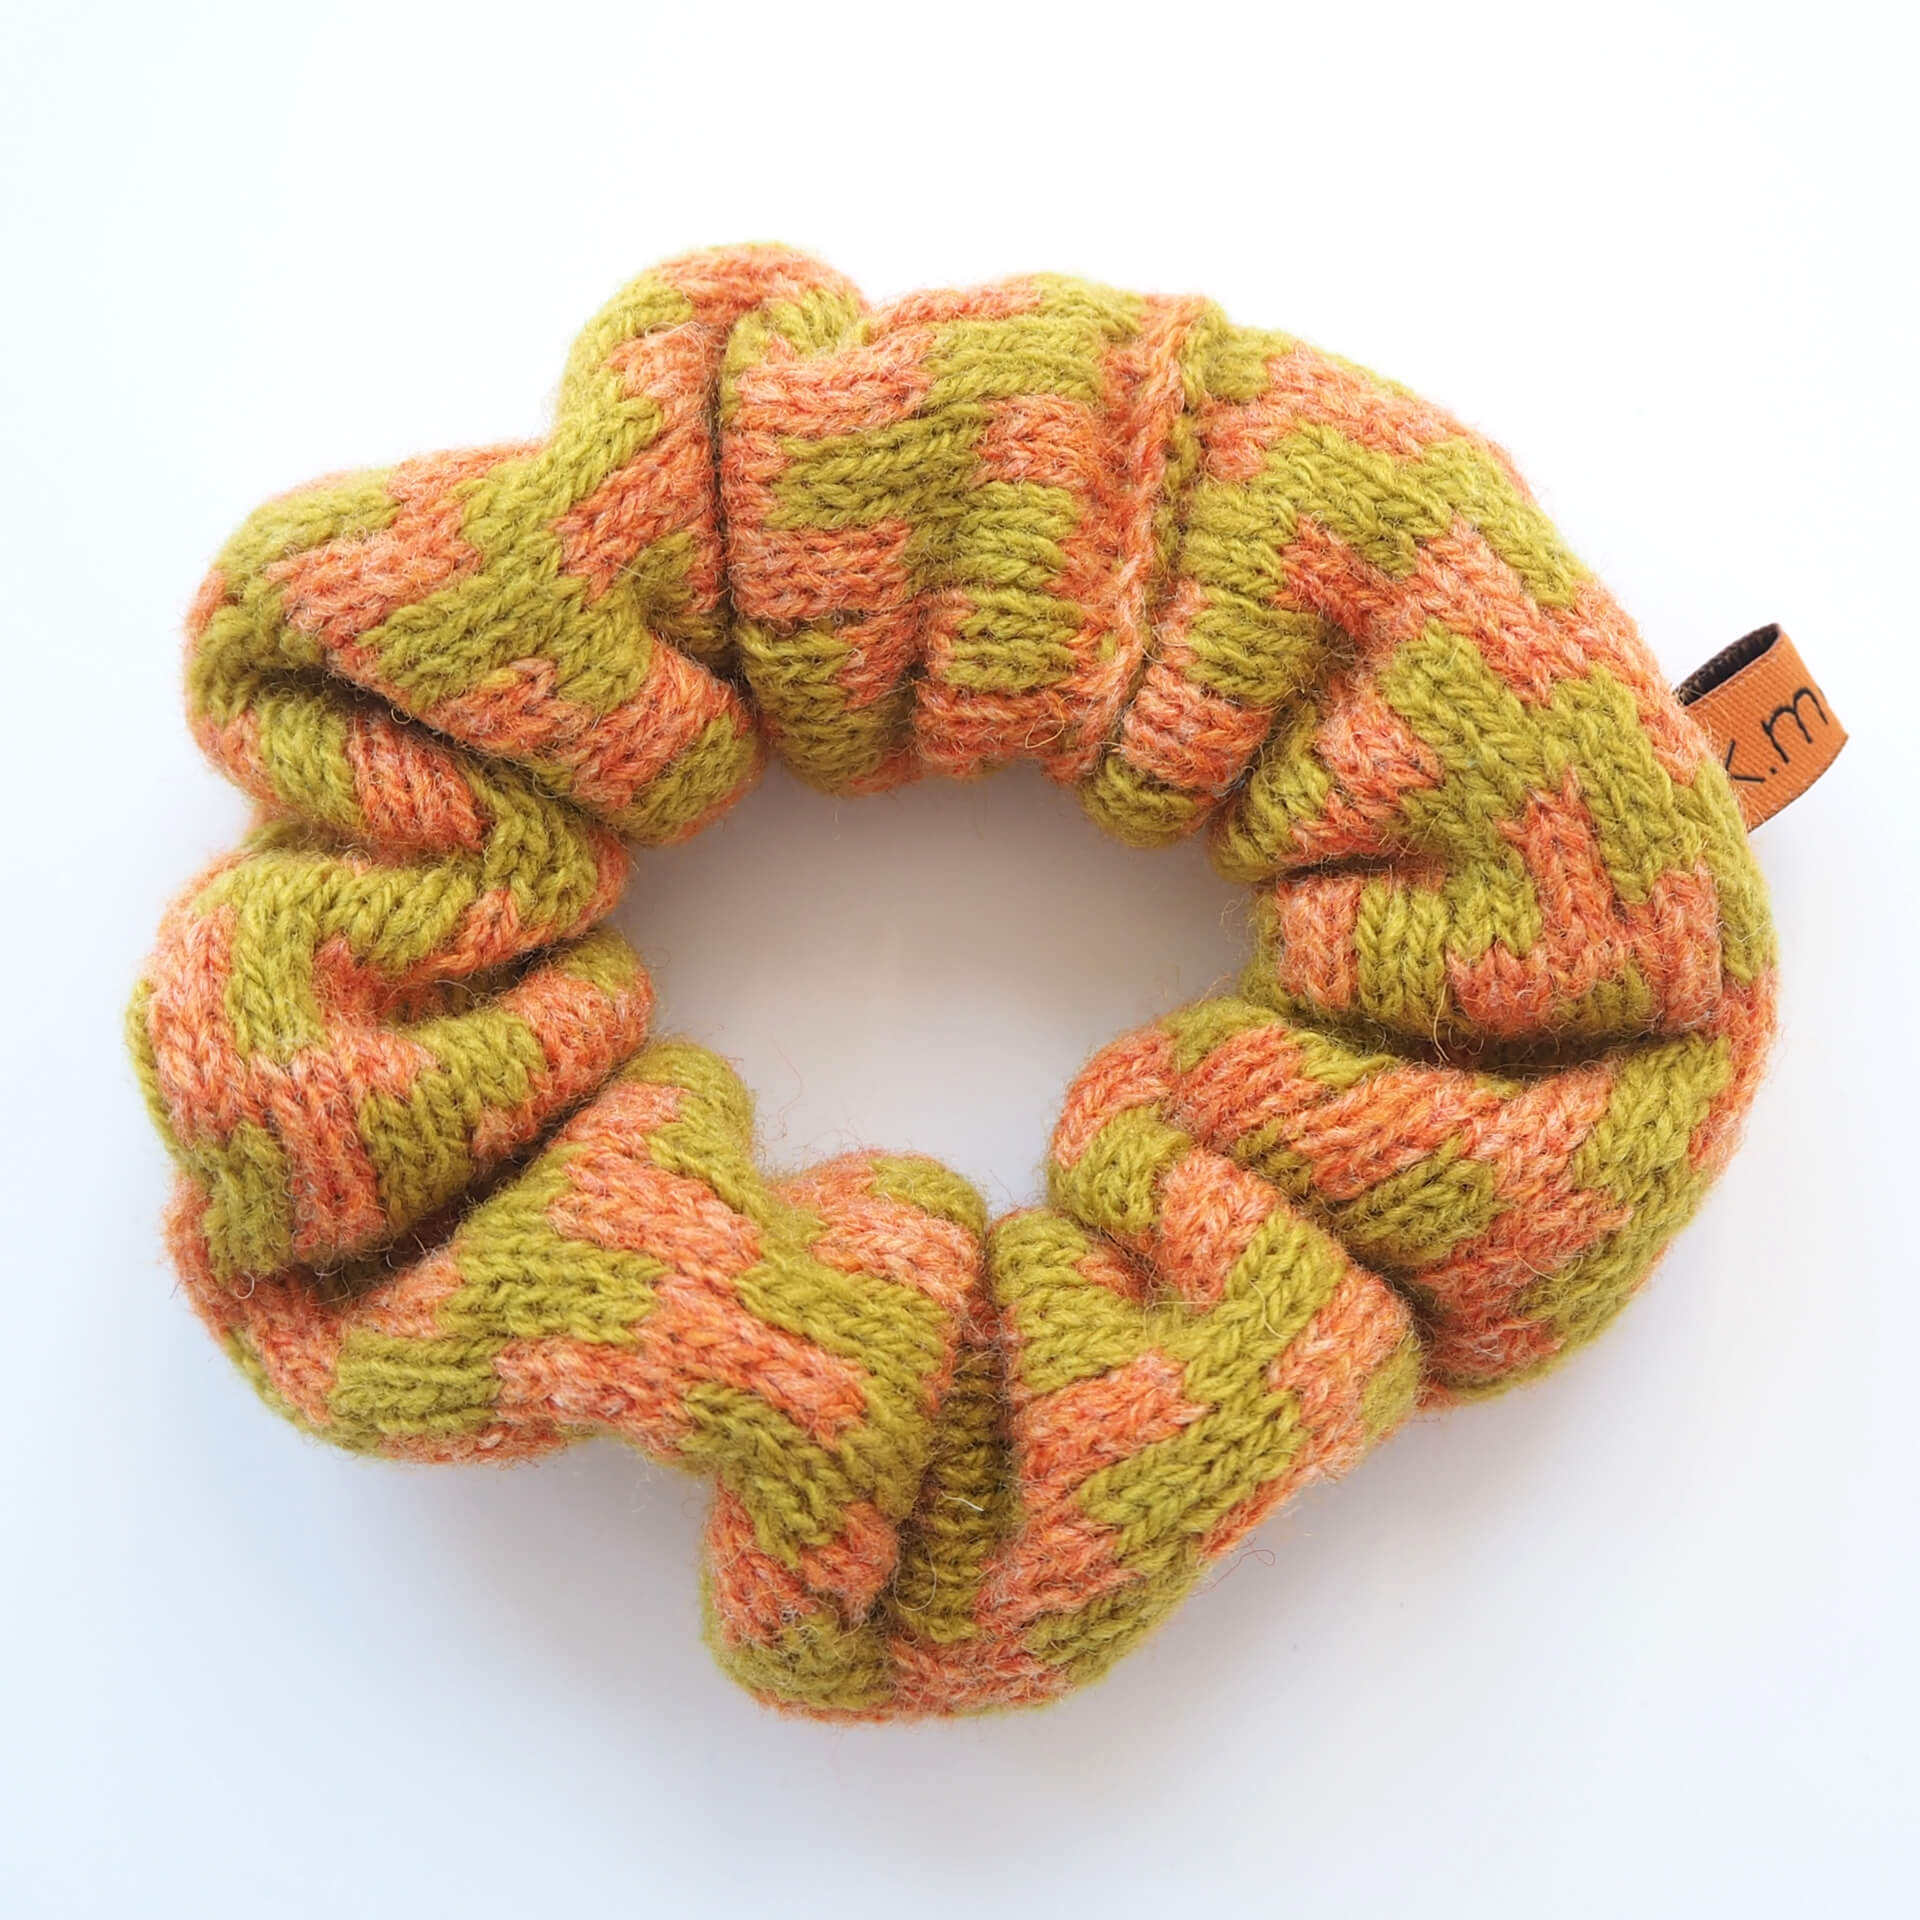 A knitted scrunchie with a thick zig-zag pattern by K.Moods. It is lime green and orange, and is on a white background.